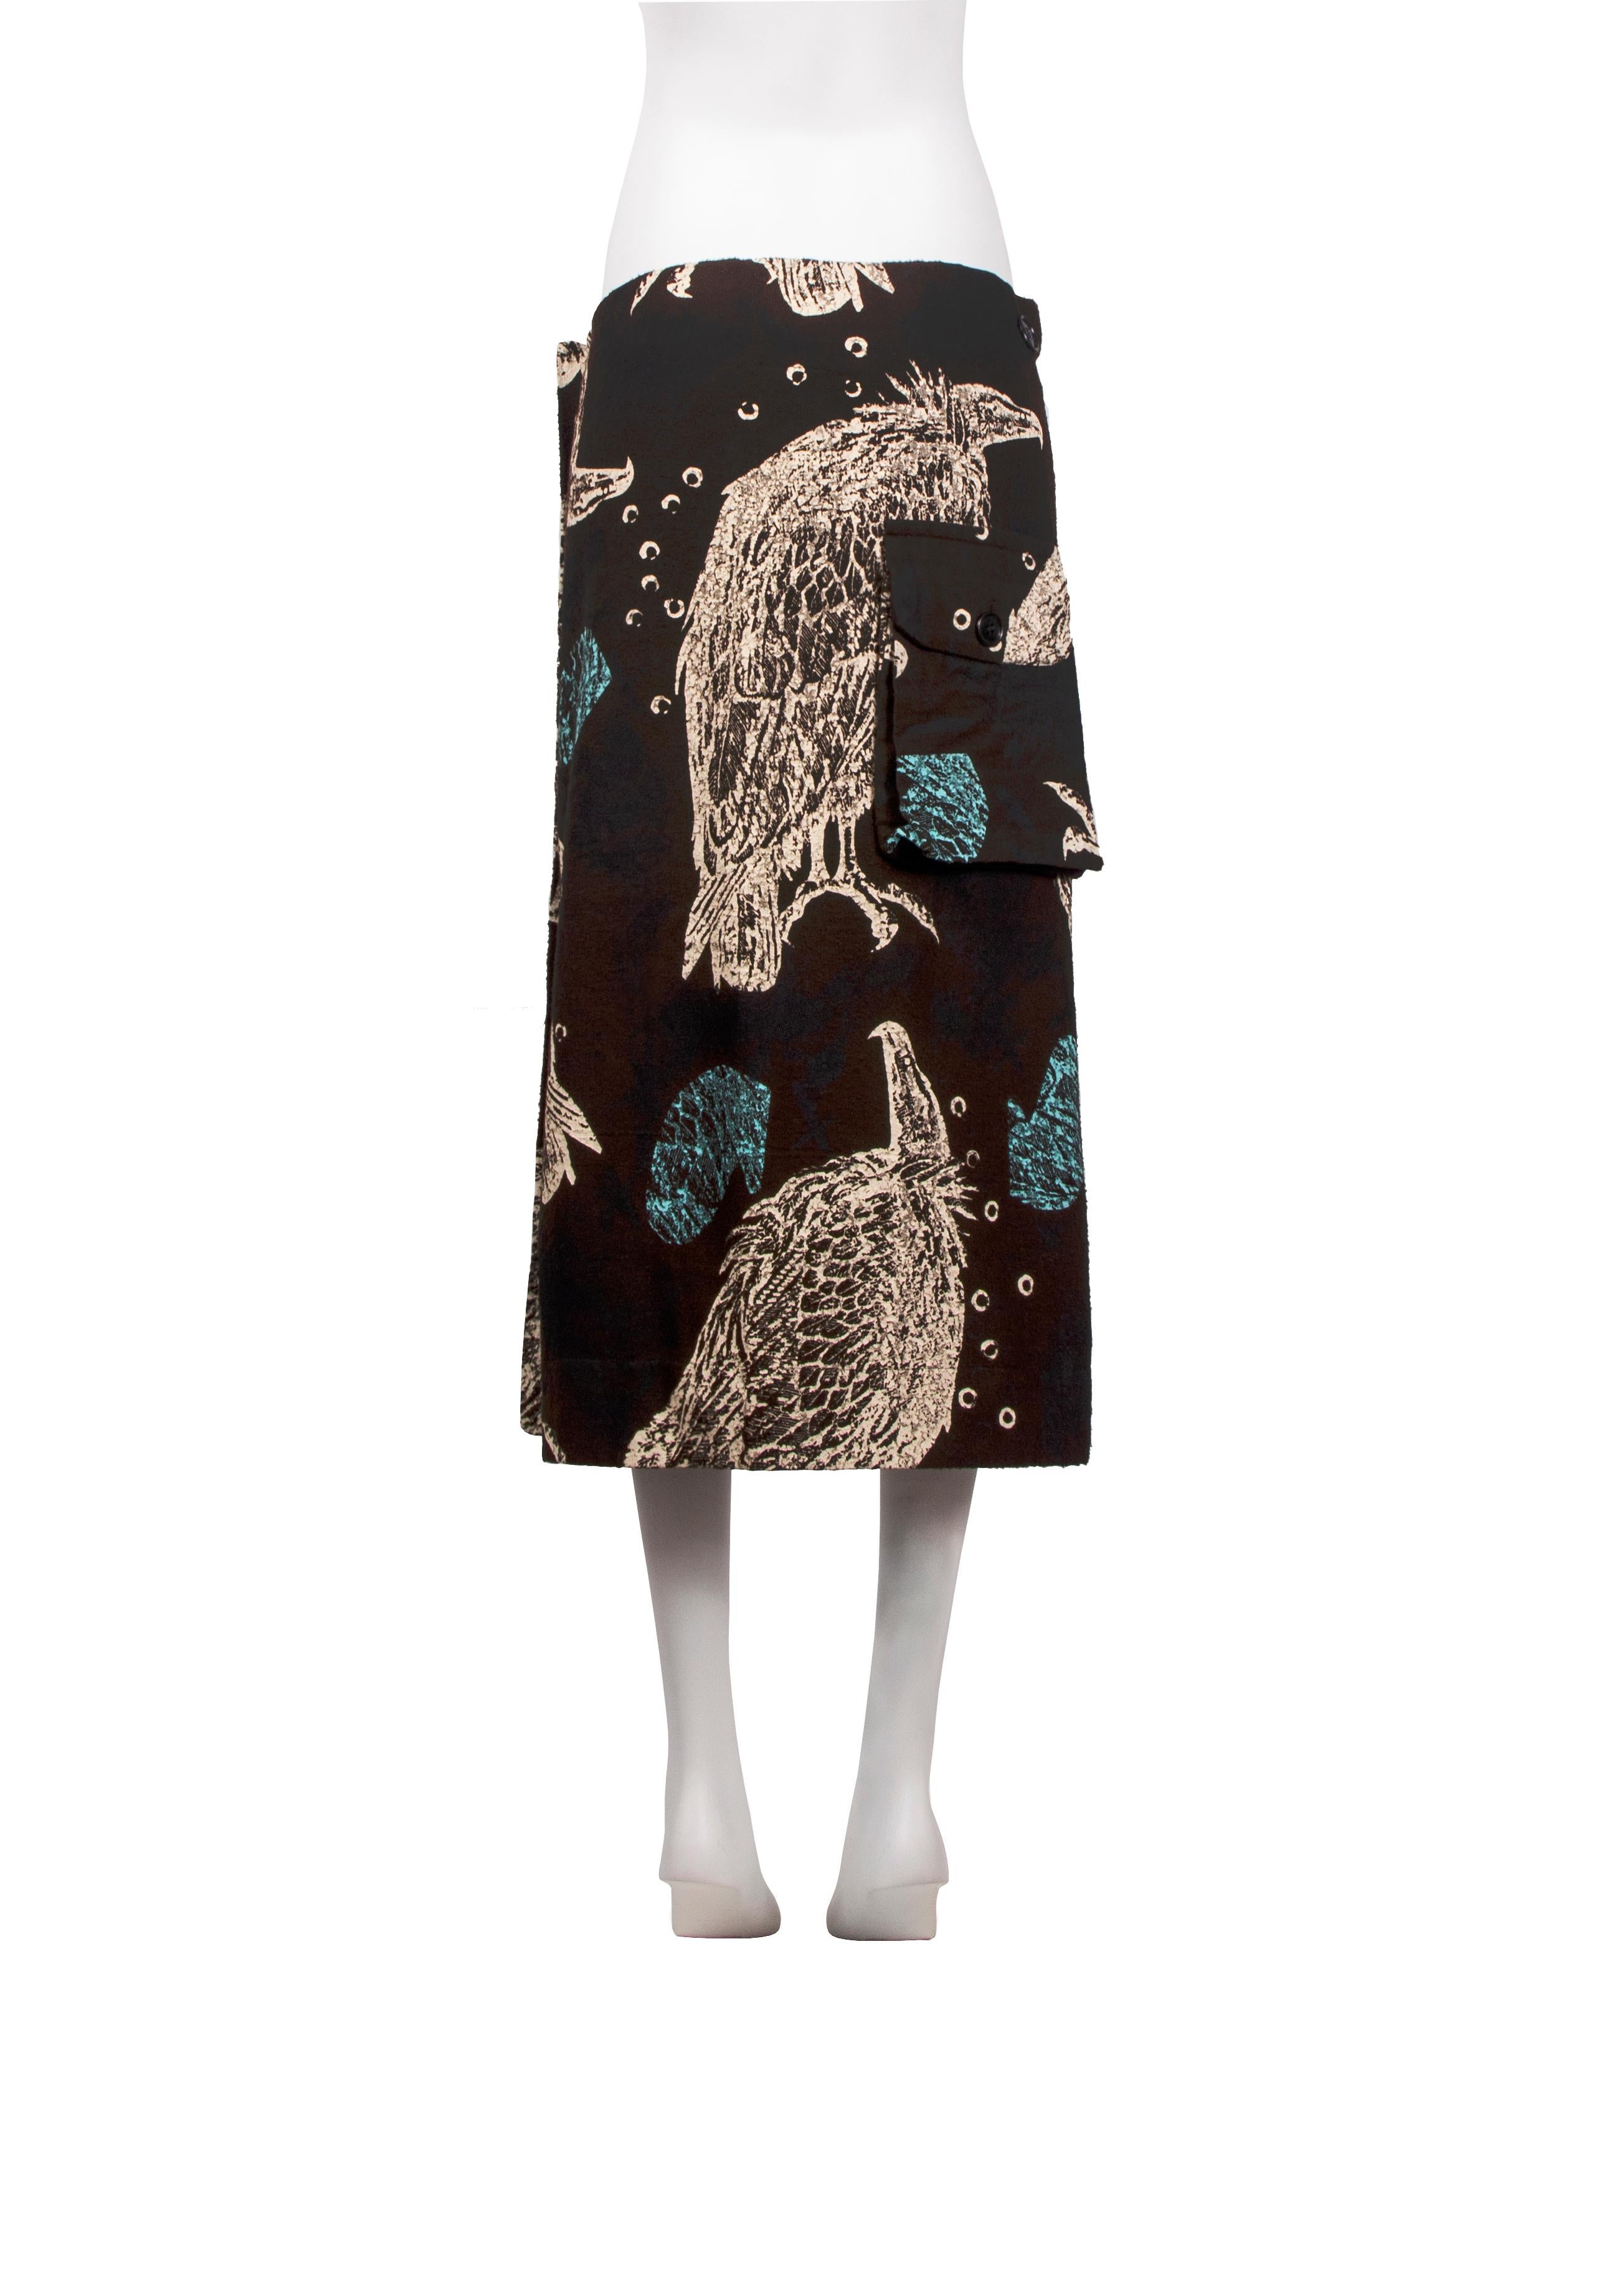 John Galliano ‘The Ludic Games’ vulture skirt, fw 1985 For Sale 3